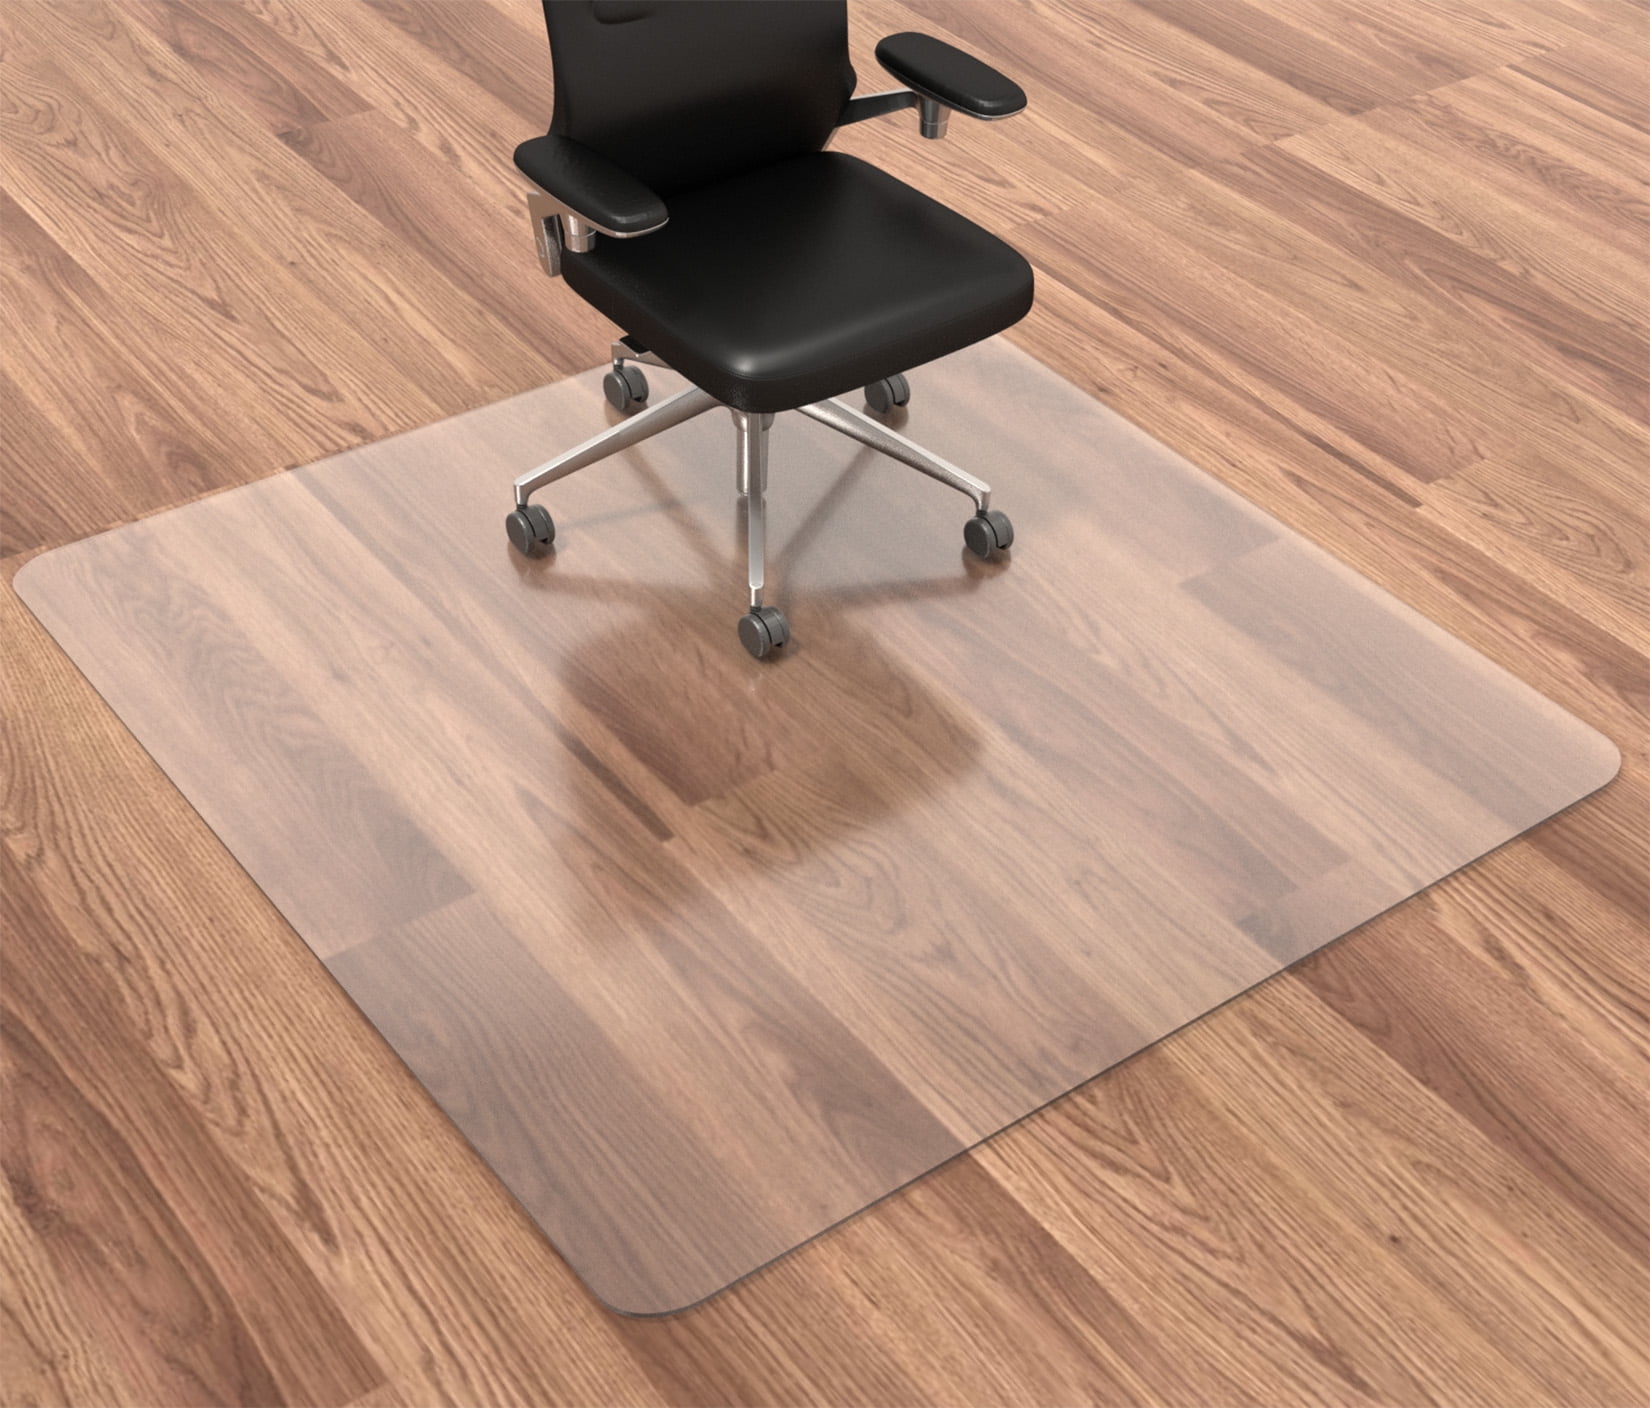 HOMEK Office Chair Mat for Carpet – Computer Desk Chair Mat for Carpeted  Floors – Easy Glide Rolling Plastic Floor Mat for Office Chair on Carpet  for Work, Home, Gaming with Extended